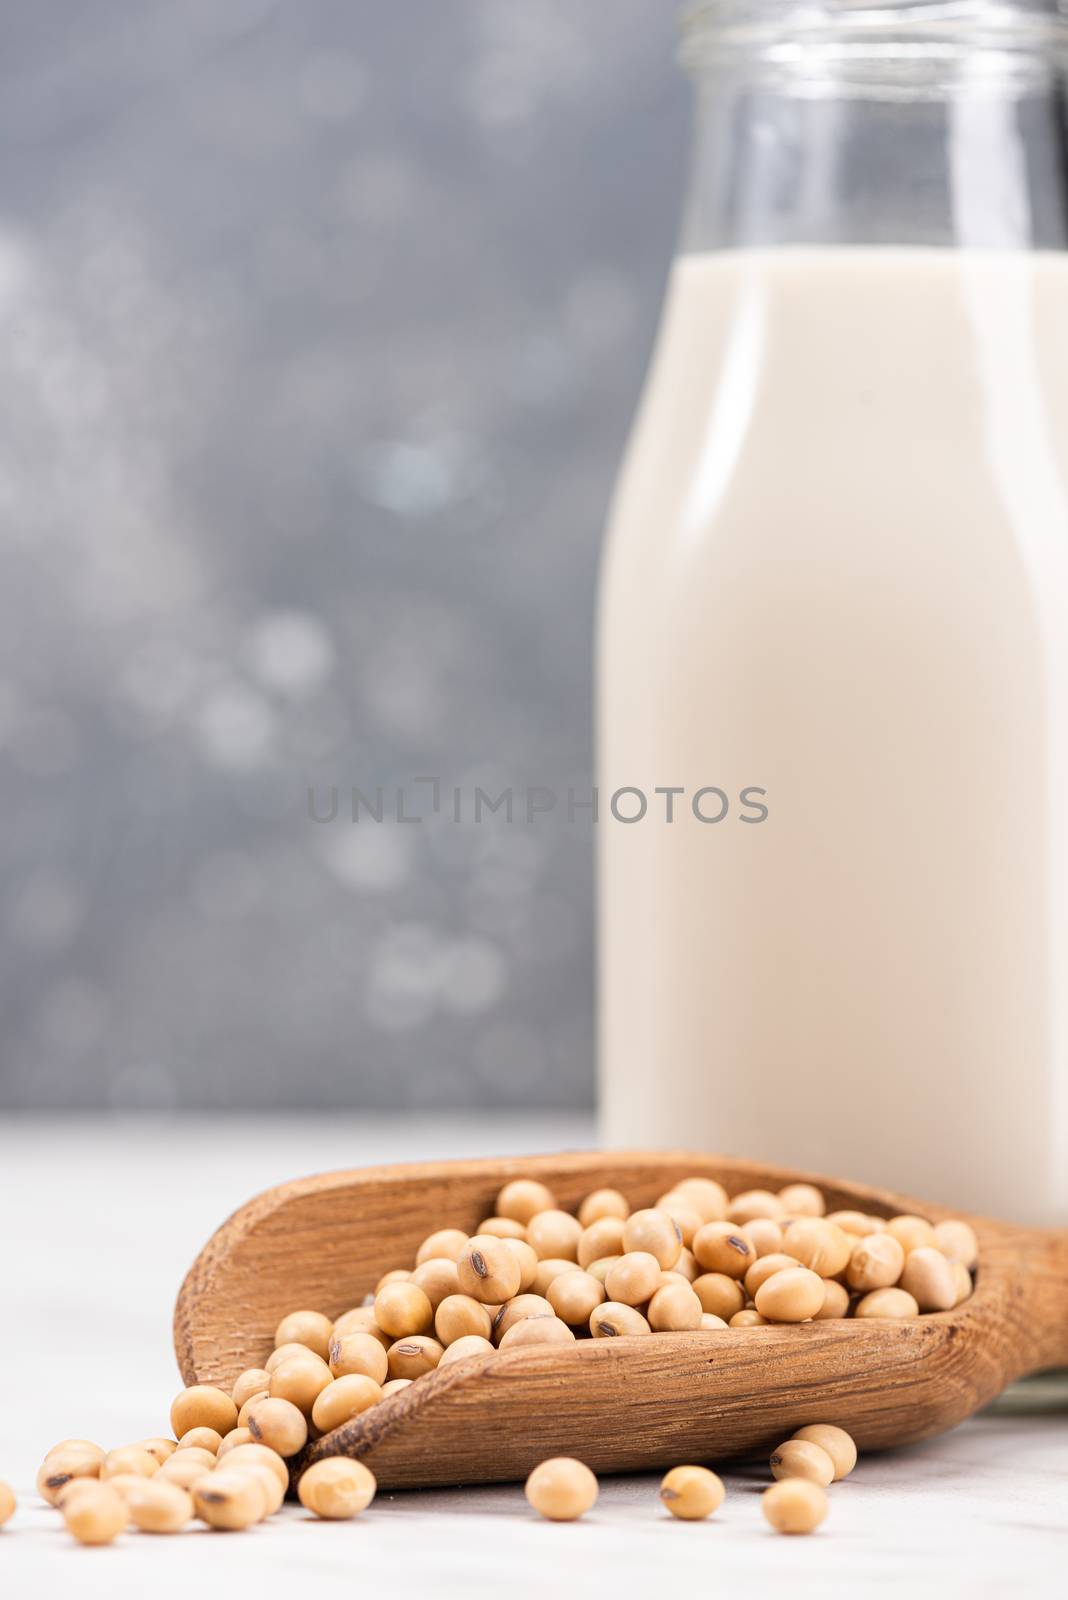 Alternative Non Dairy Soy or Soya Milk. Diet and Nutrition Conce by merc67